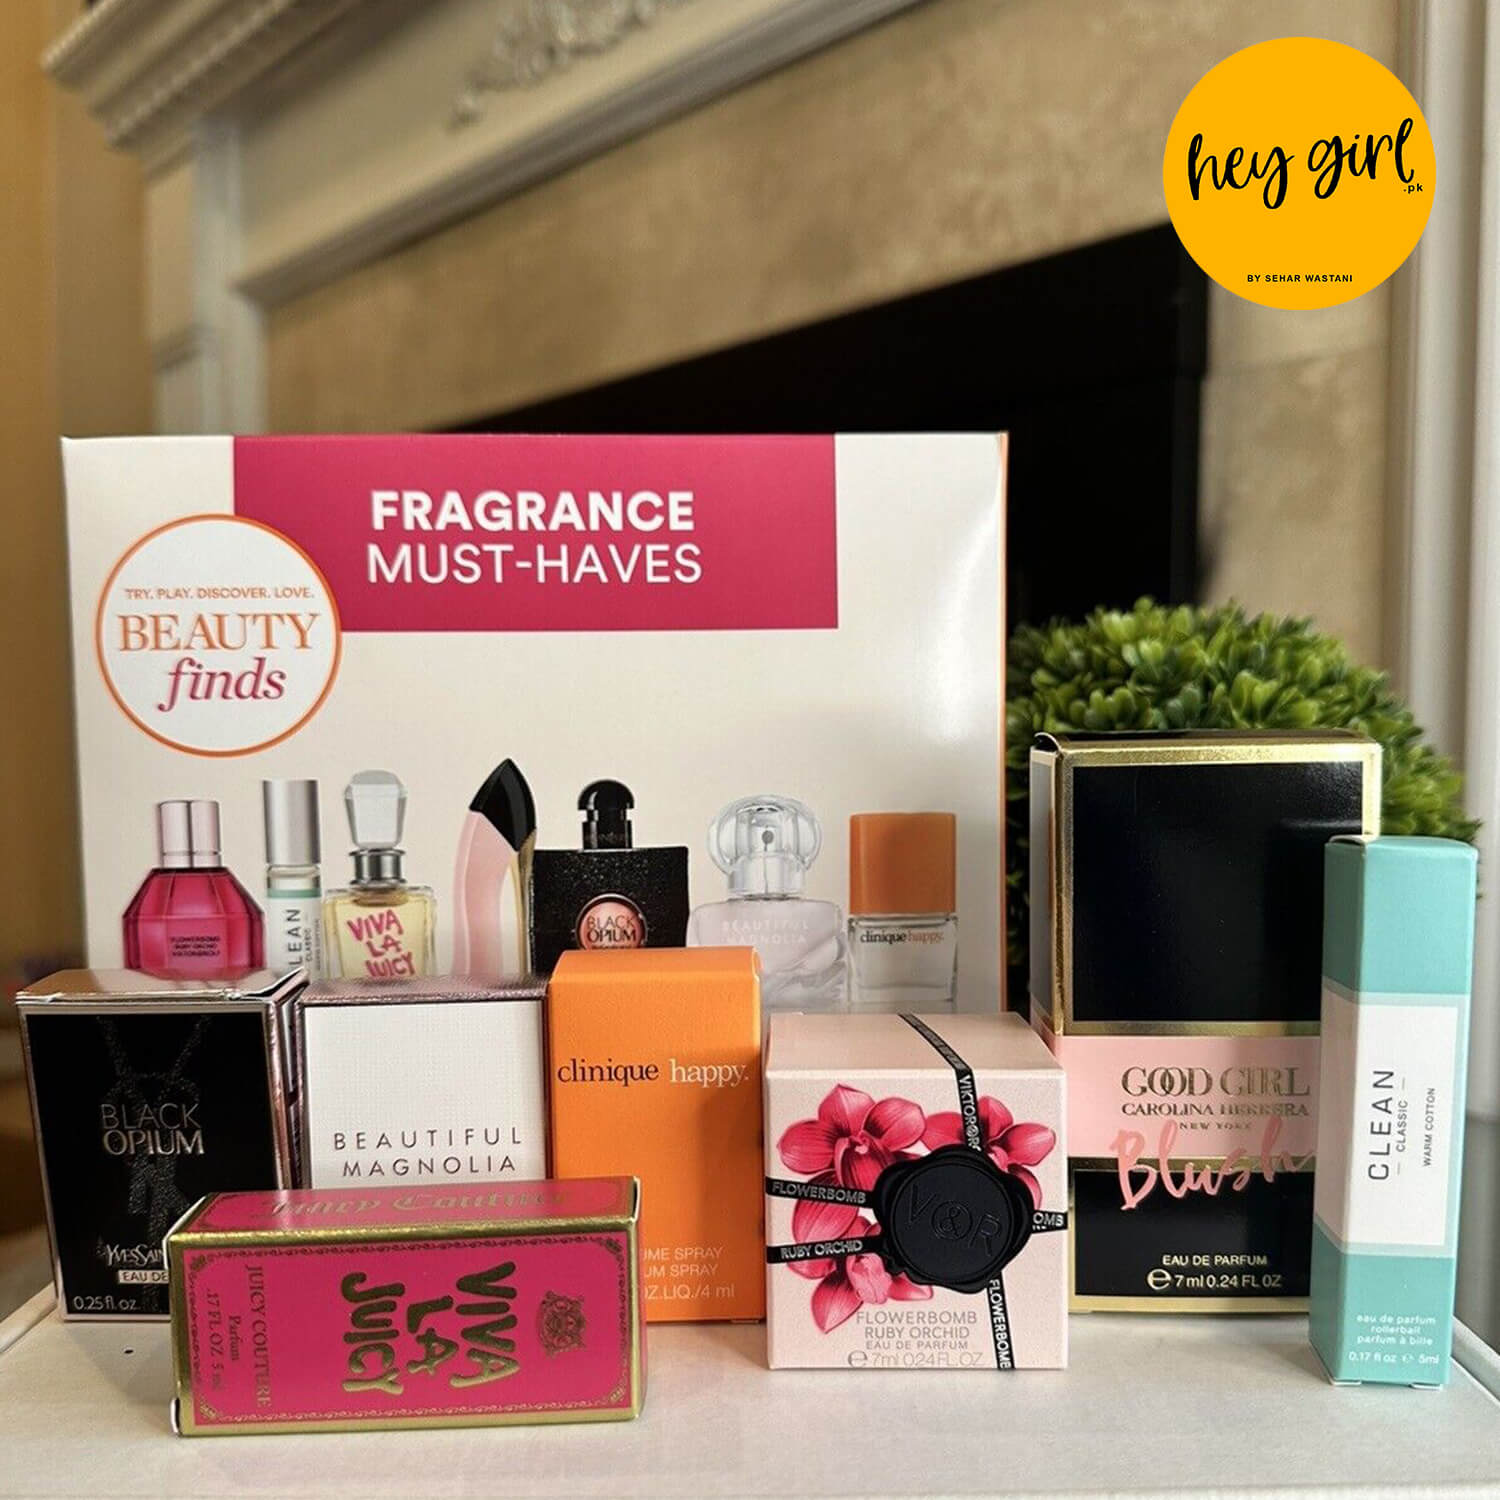 shop ulta perfume gift set available at Heygirl.pk for delivery in Pakistan